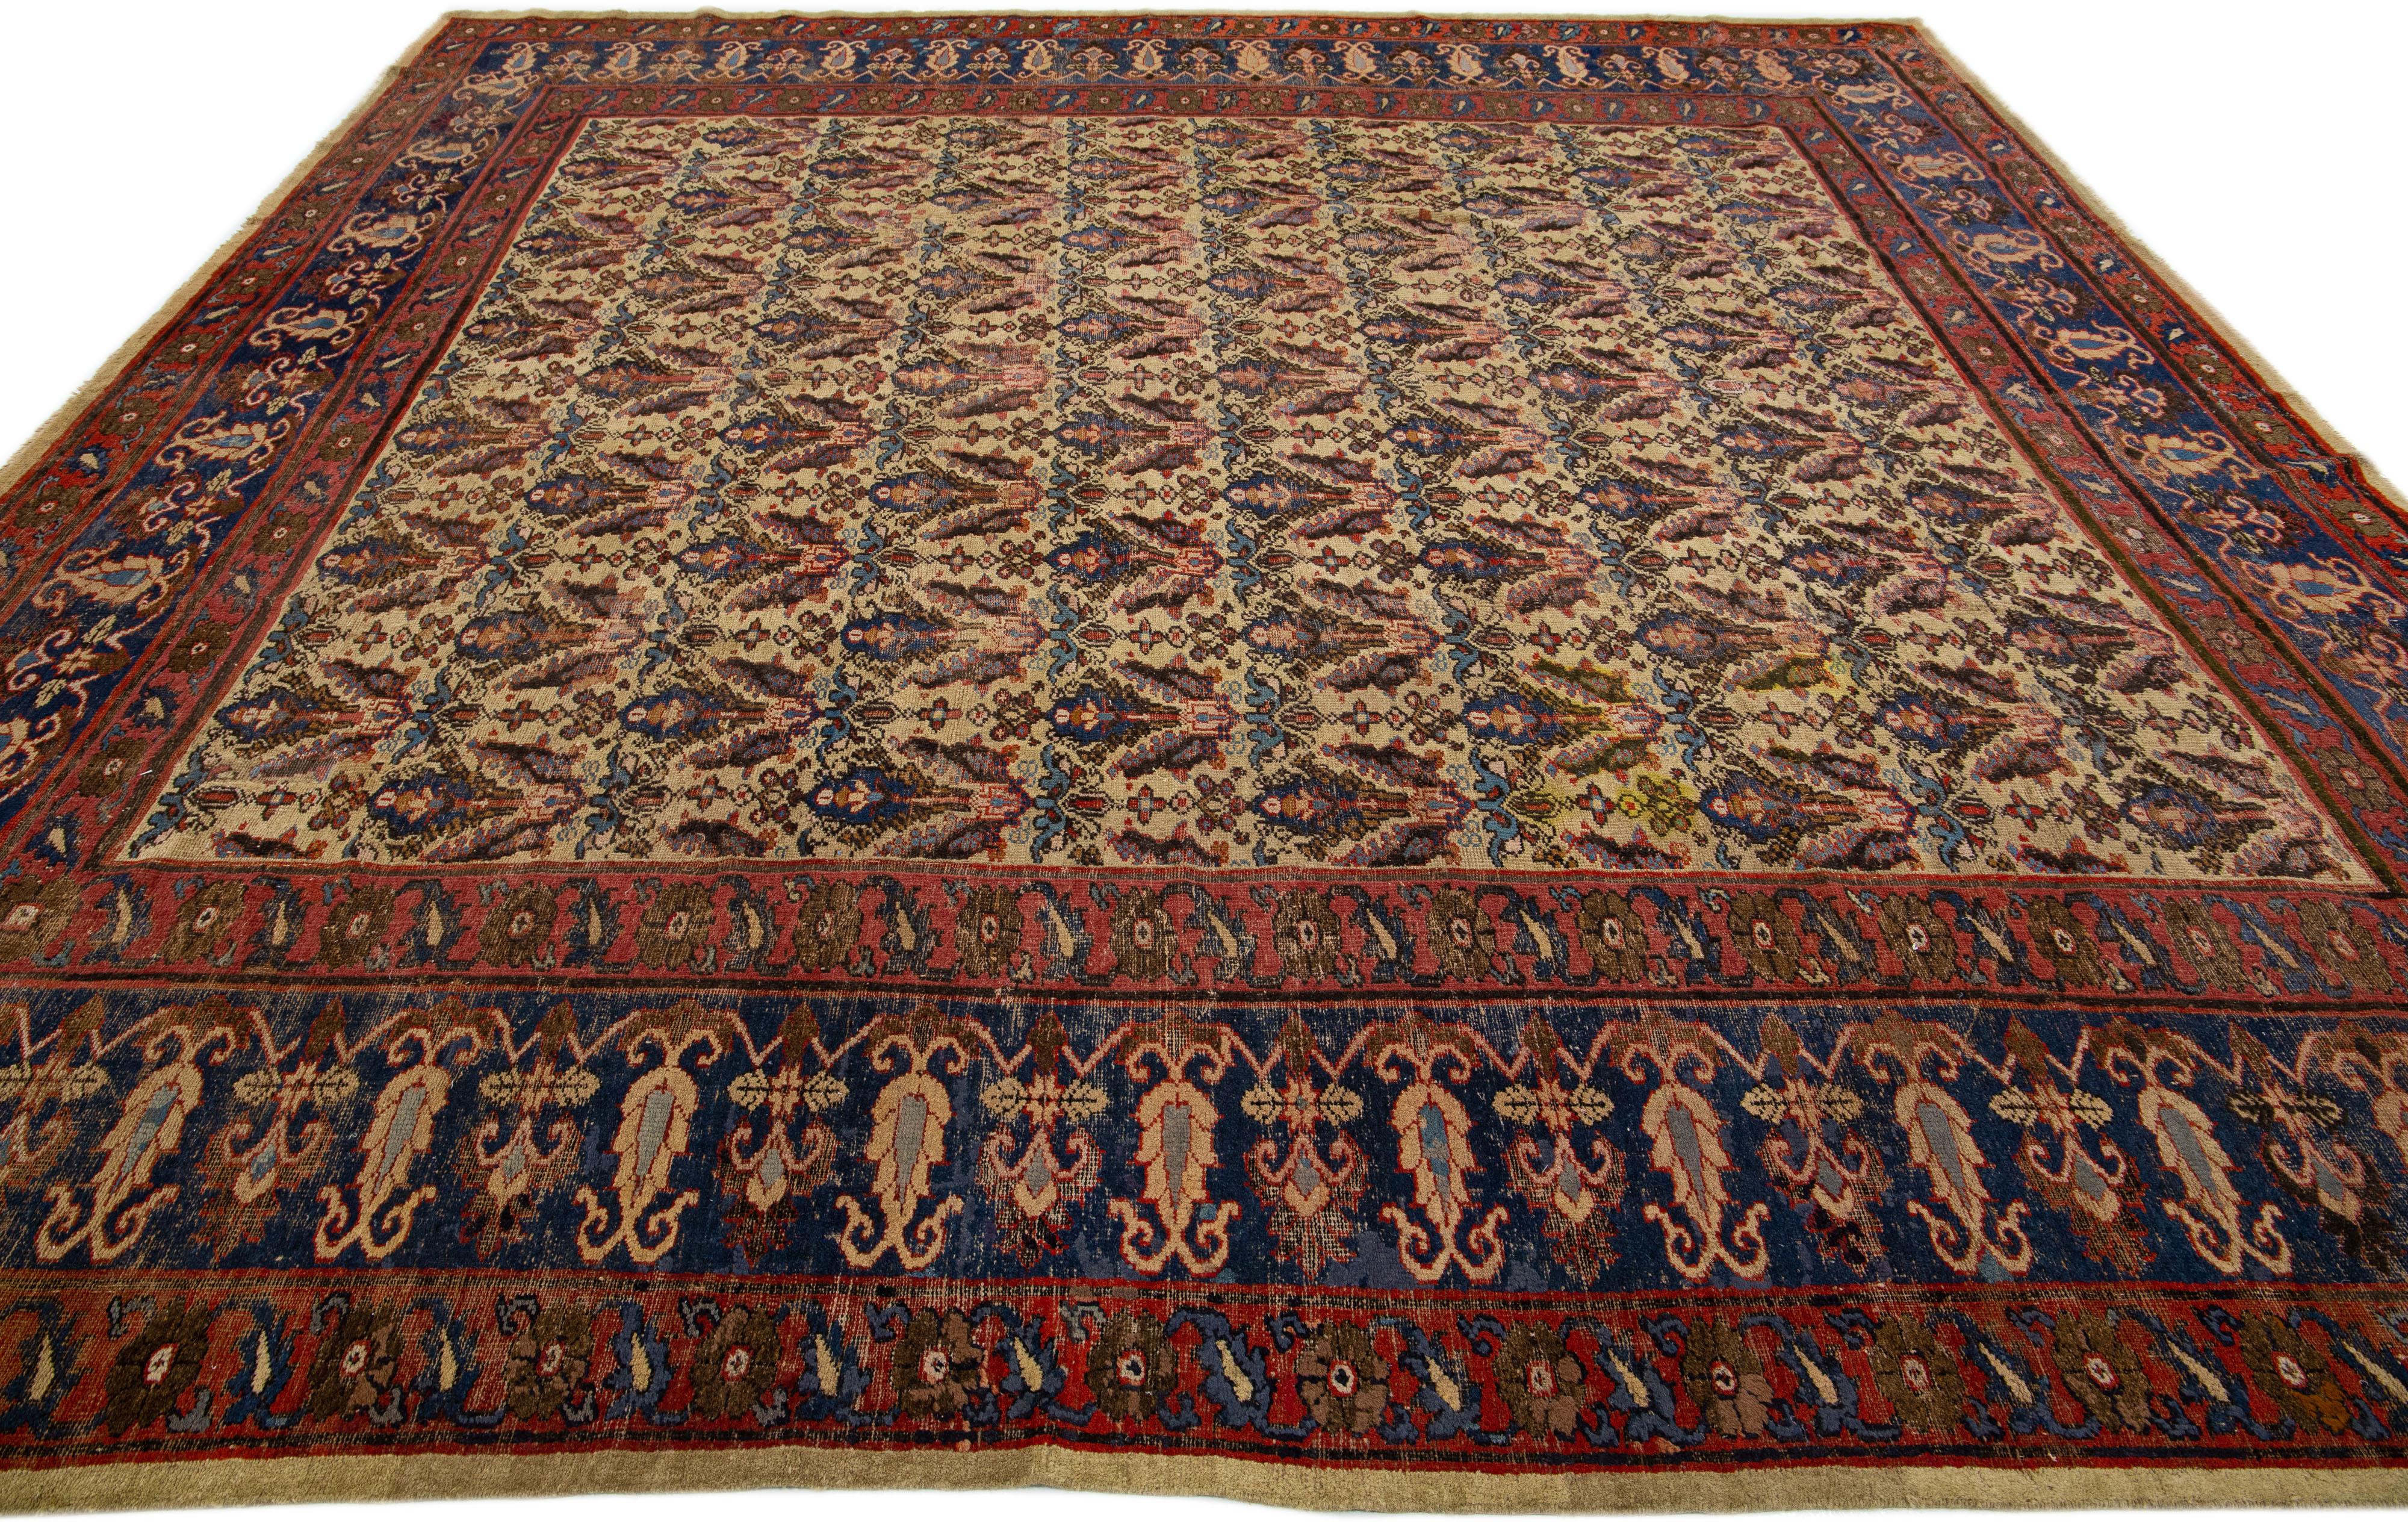 This exquisite Antique hand knotted Agra wool rug features a brown color field accented by blue and rust motifs in a timeless medallion floral pattern.

This rug measures: 12' x 12'.

.